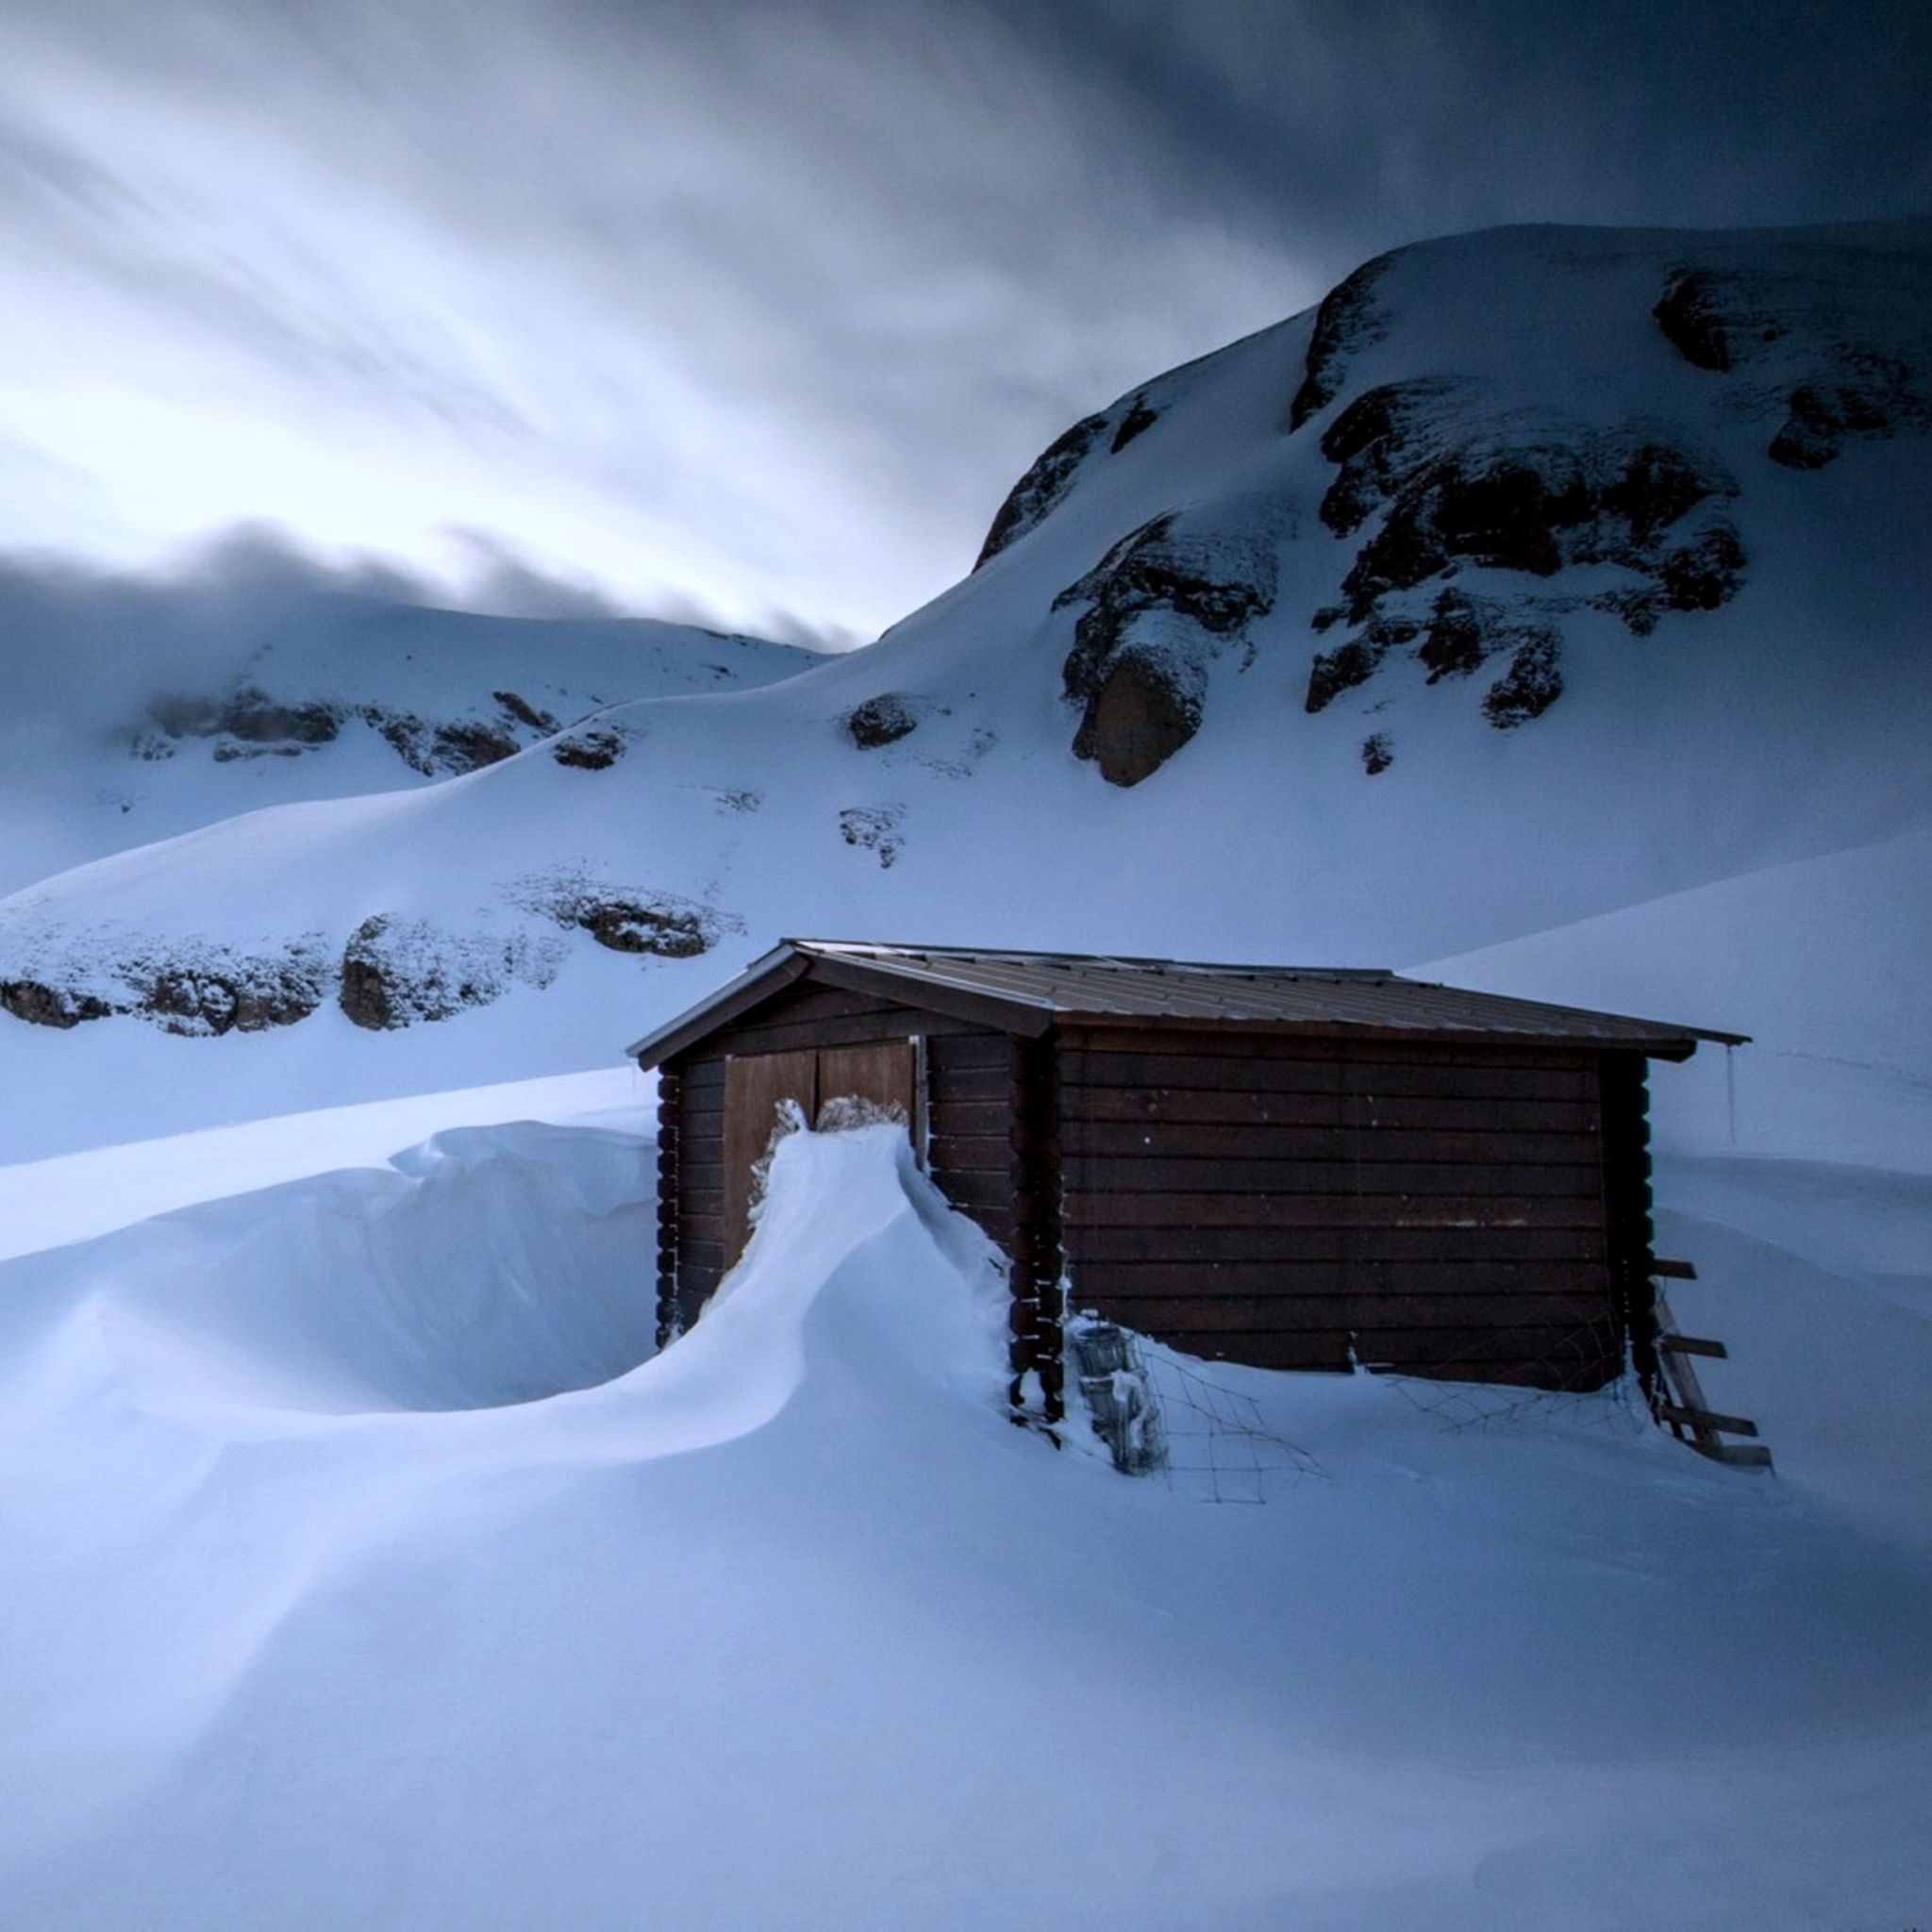 photography, winter, cold, white, nature, snow, hut, mountain, landscape, house